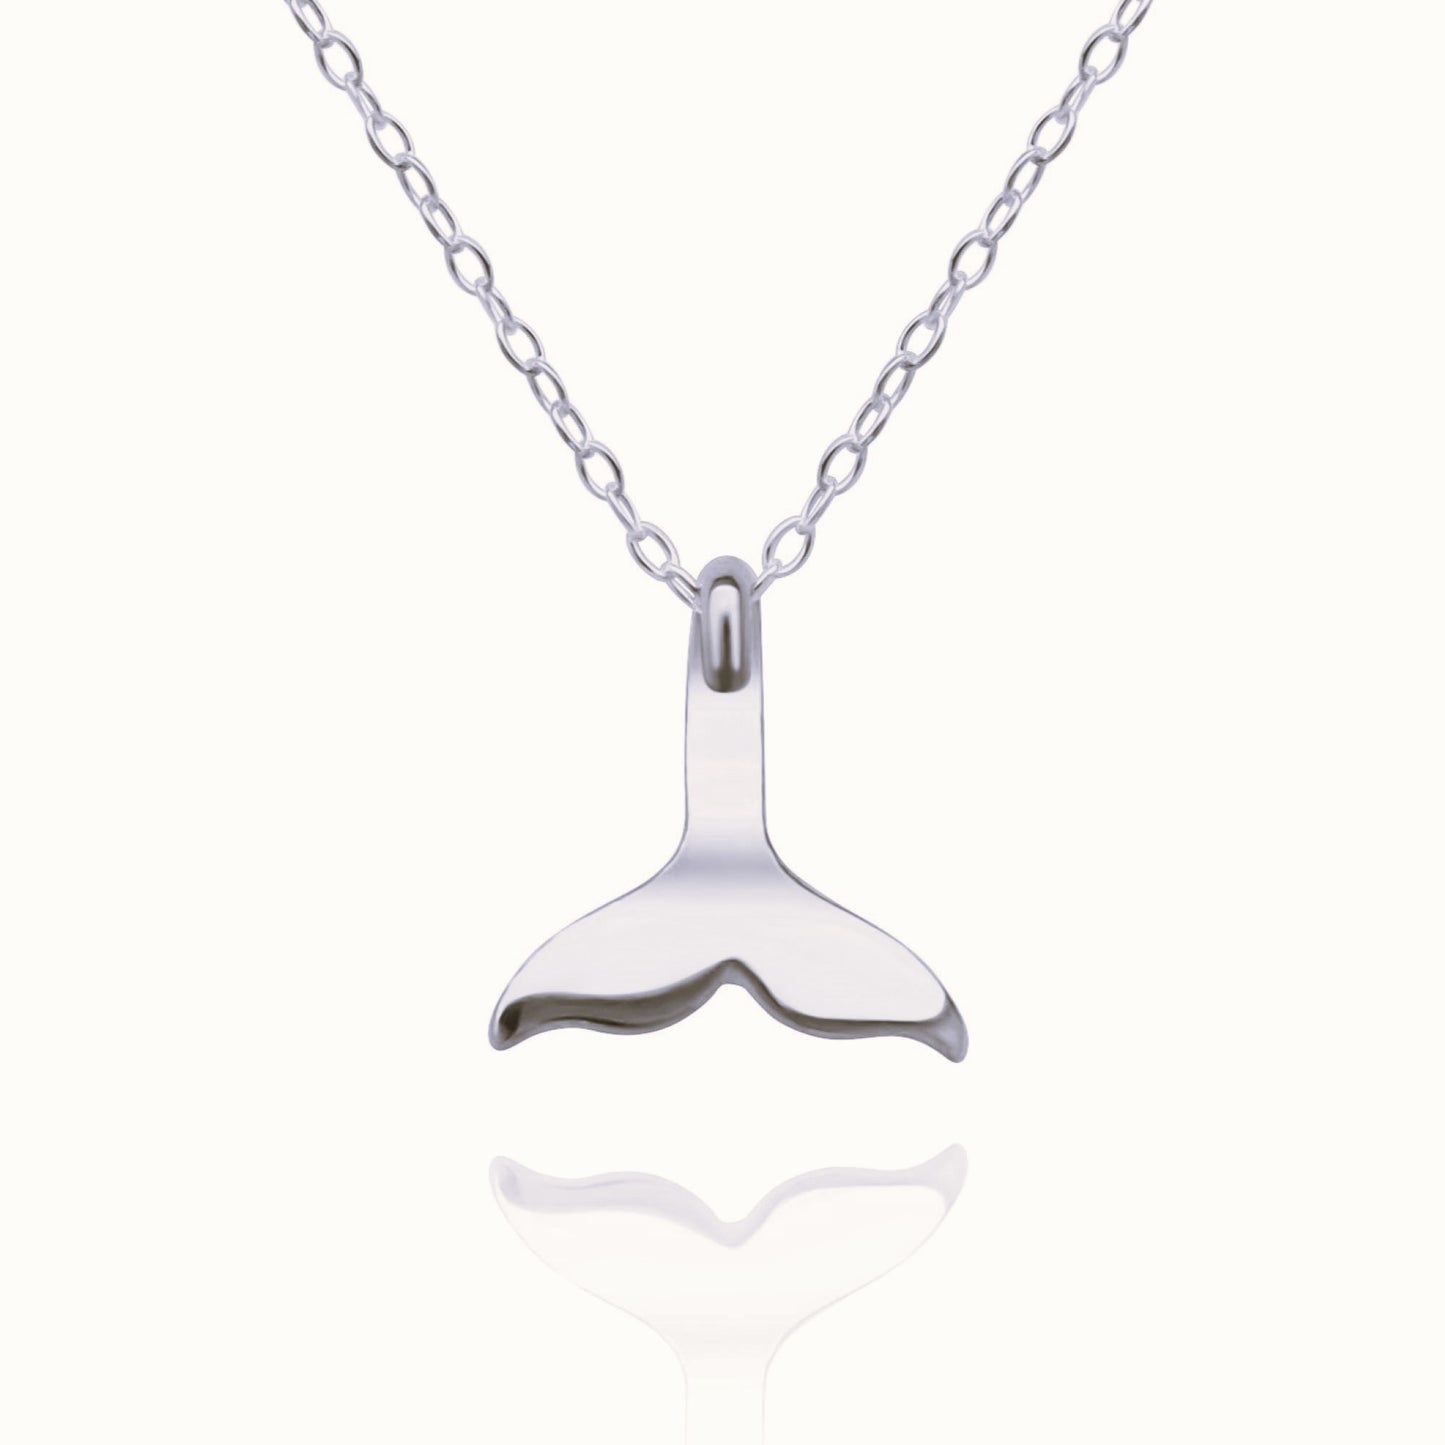 Platinum Classic Whale Tail charm with a solid platinum chain. Made to order. © Adrian Ashley